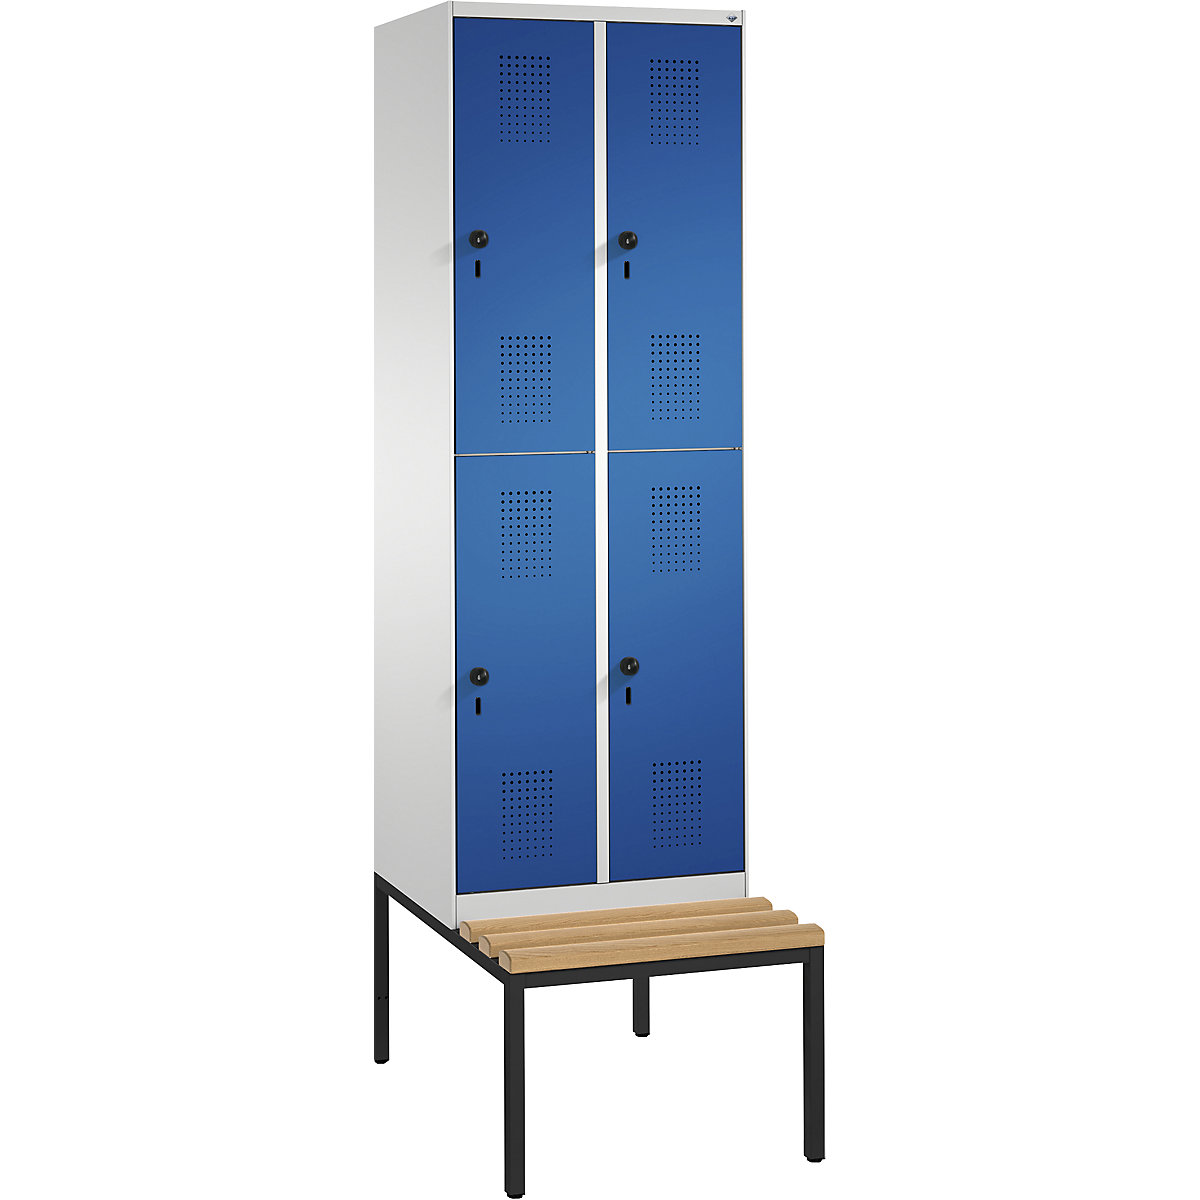 EVOLO cloakroom locker, double tier, with bench – C+P, 2 compartments, 2 shelf compartments each, compartment width 300 mm, light grey / gentian blue-15